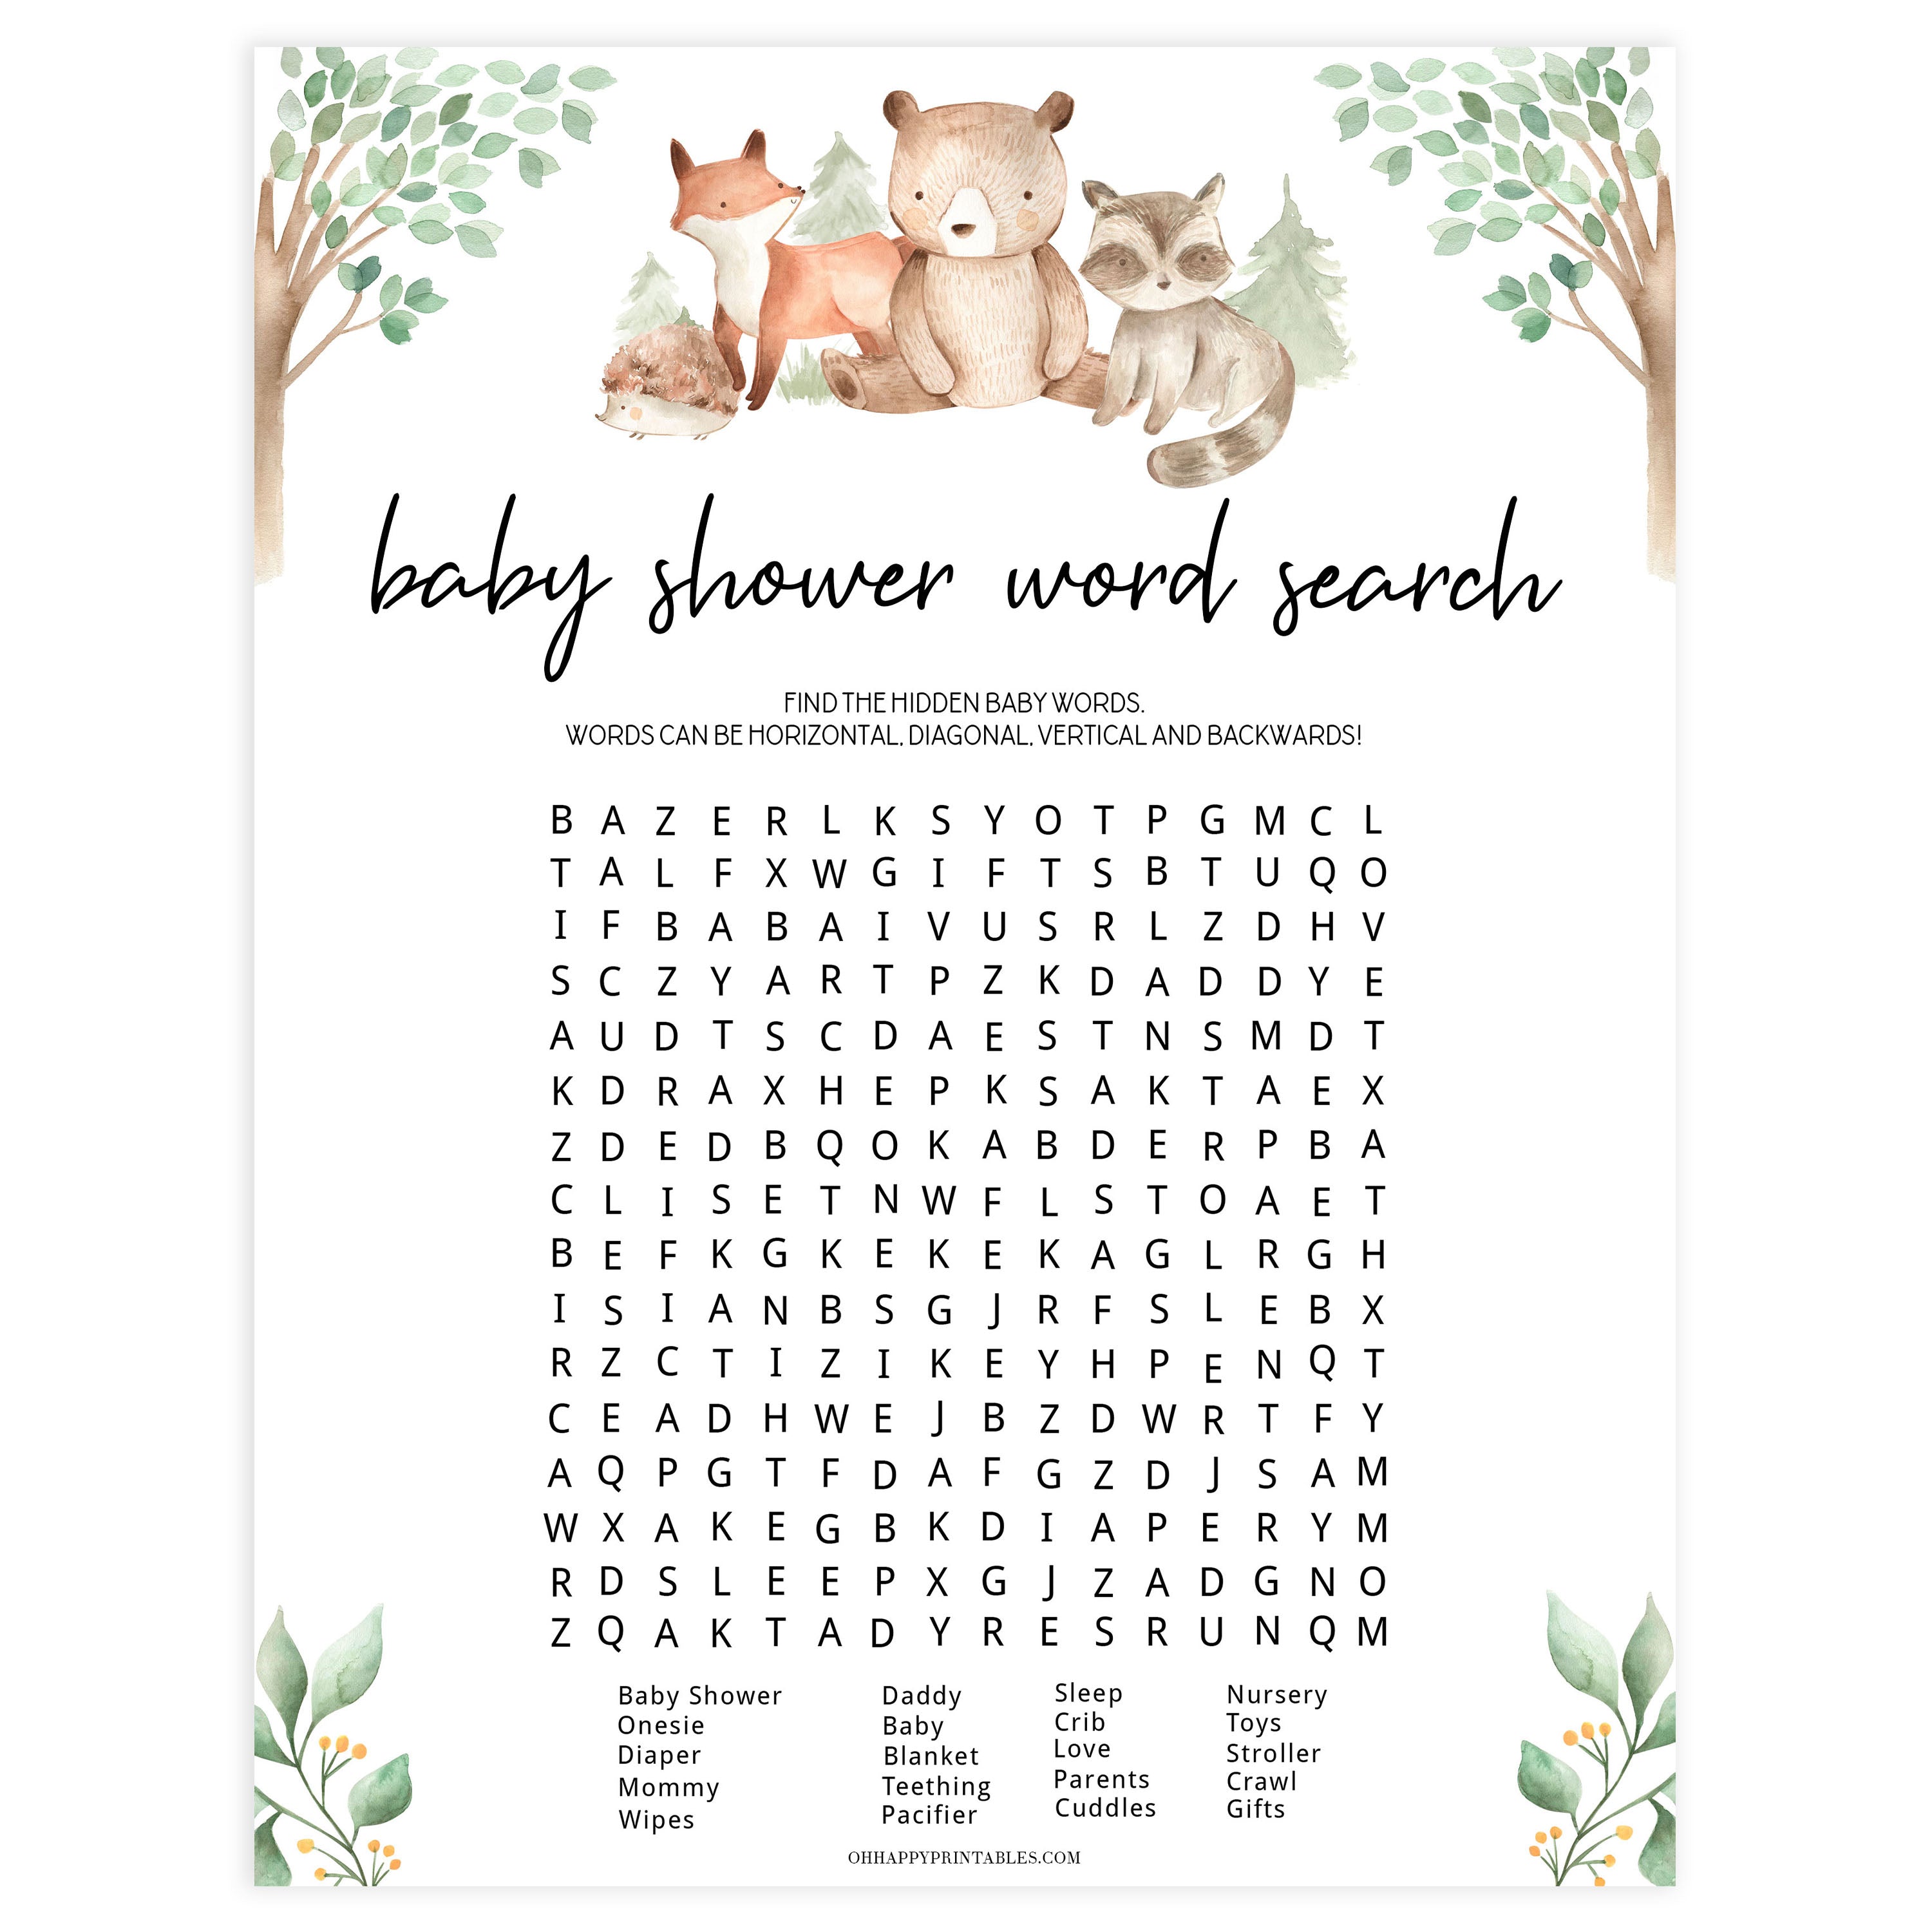 baby shower word search game, Printable baby shower games, woodland animals baby games, baby shower games, fun baby shower ideas, top baby shower ideas, woodland baby shower, baby shower games, fun woodland animals baby shower ideas